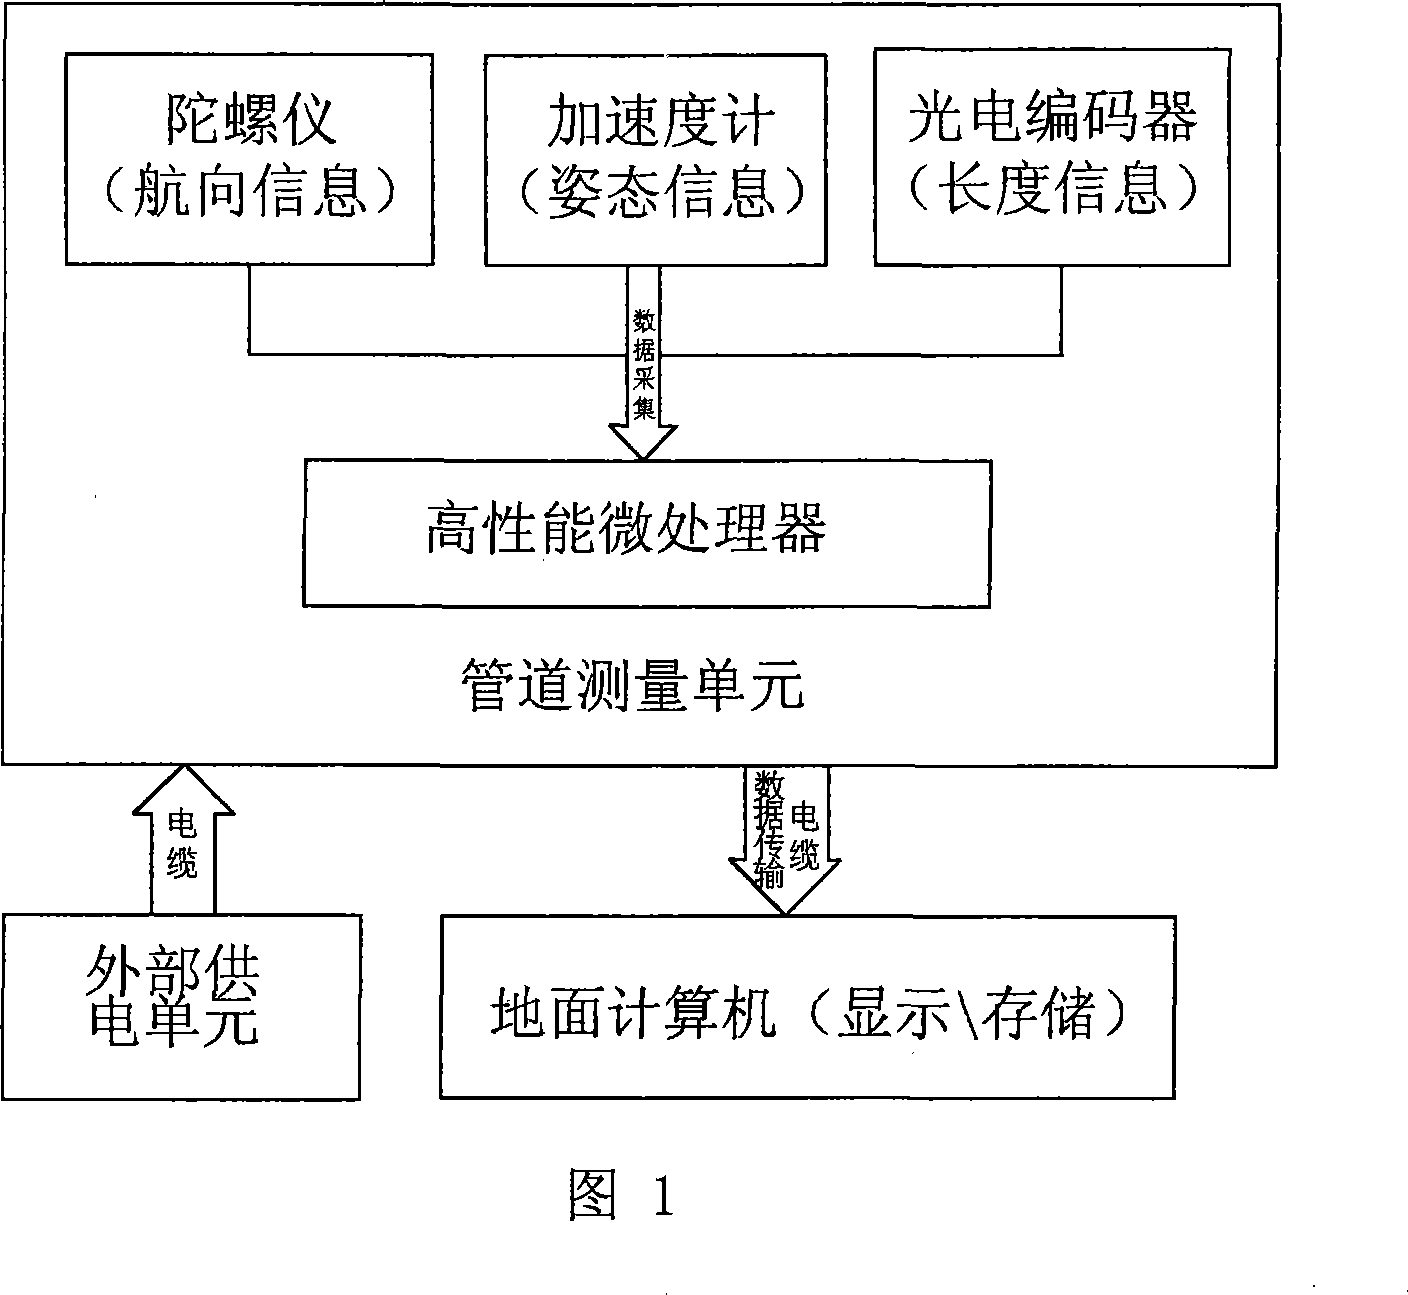 Underground pipeline measuring system based on inertial technology and its measuring and its calculating method